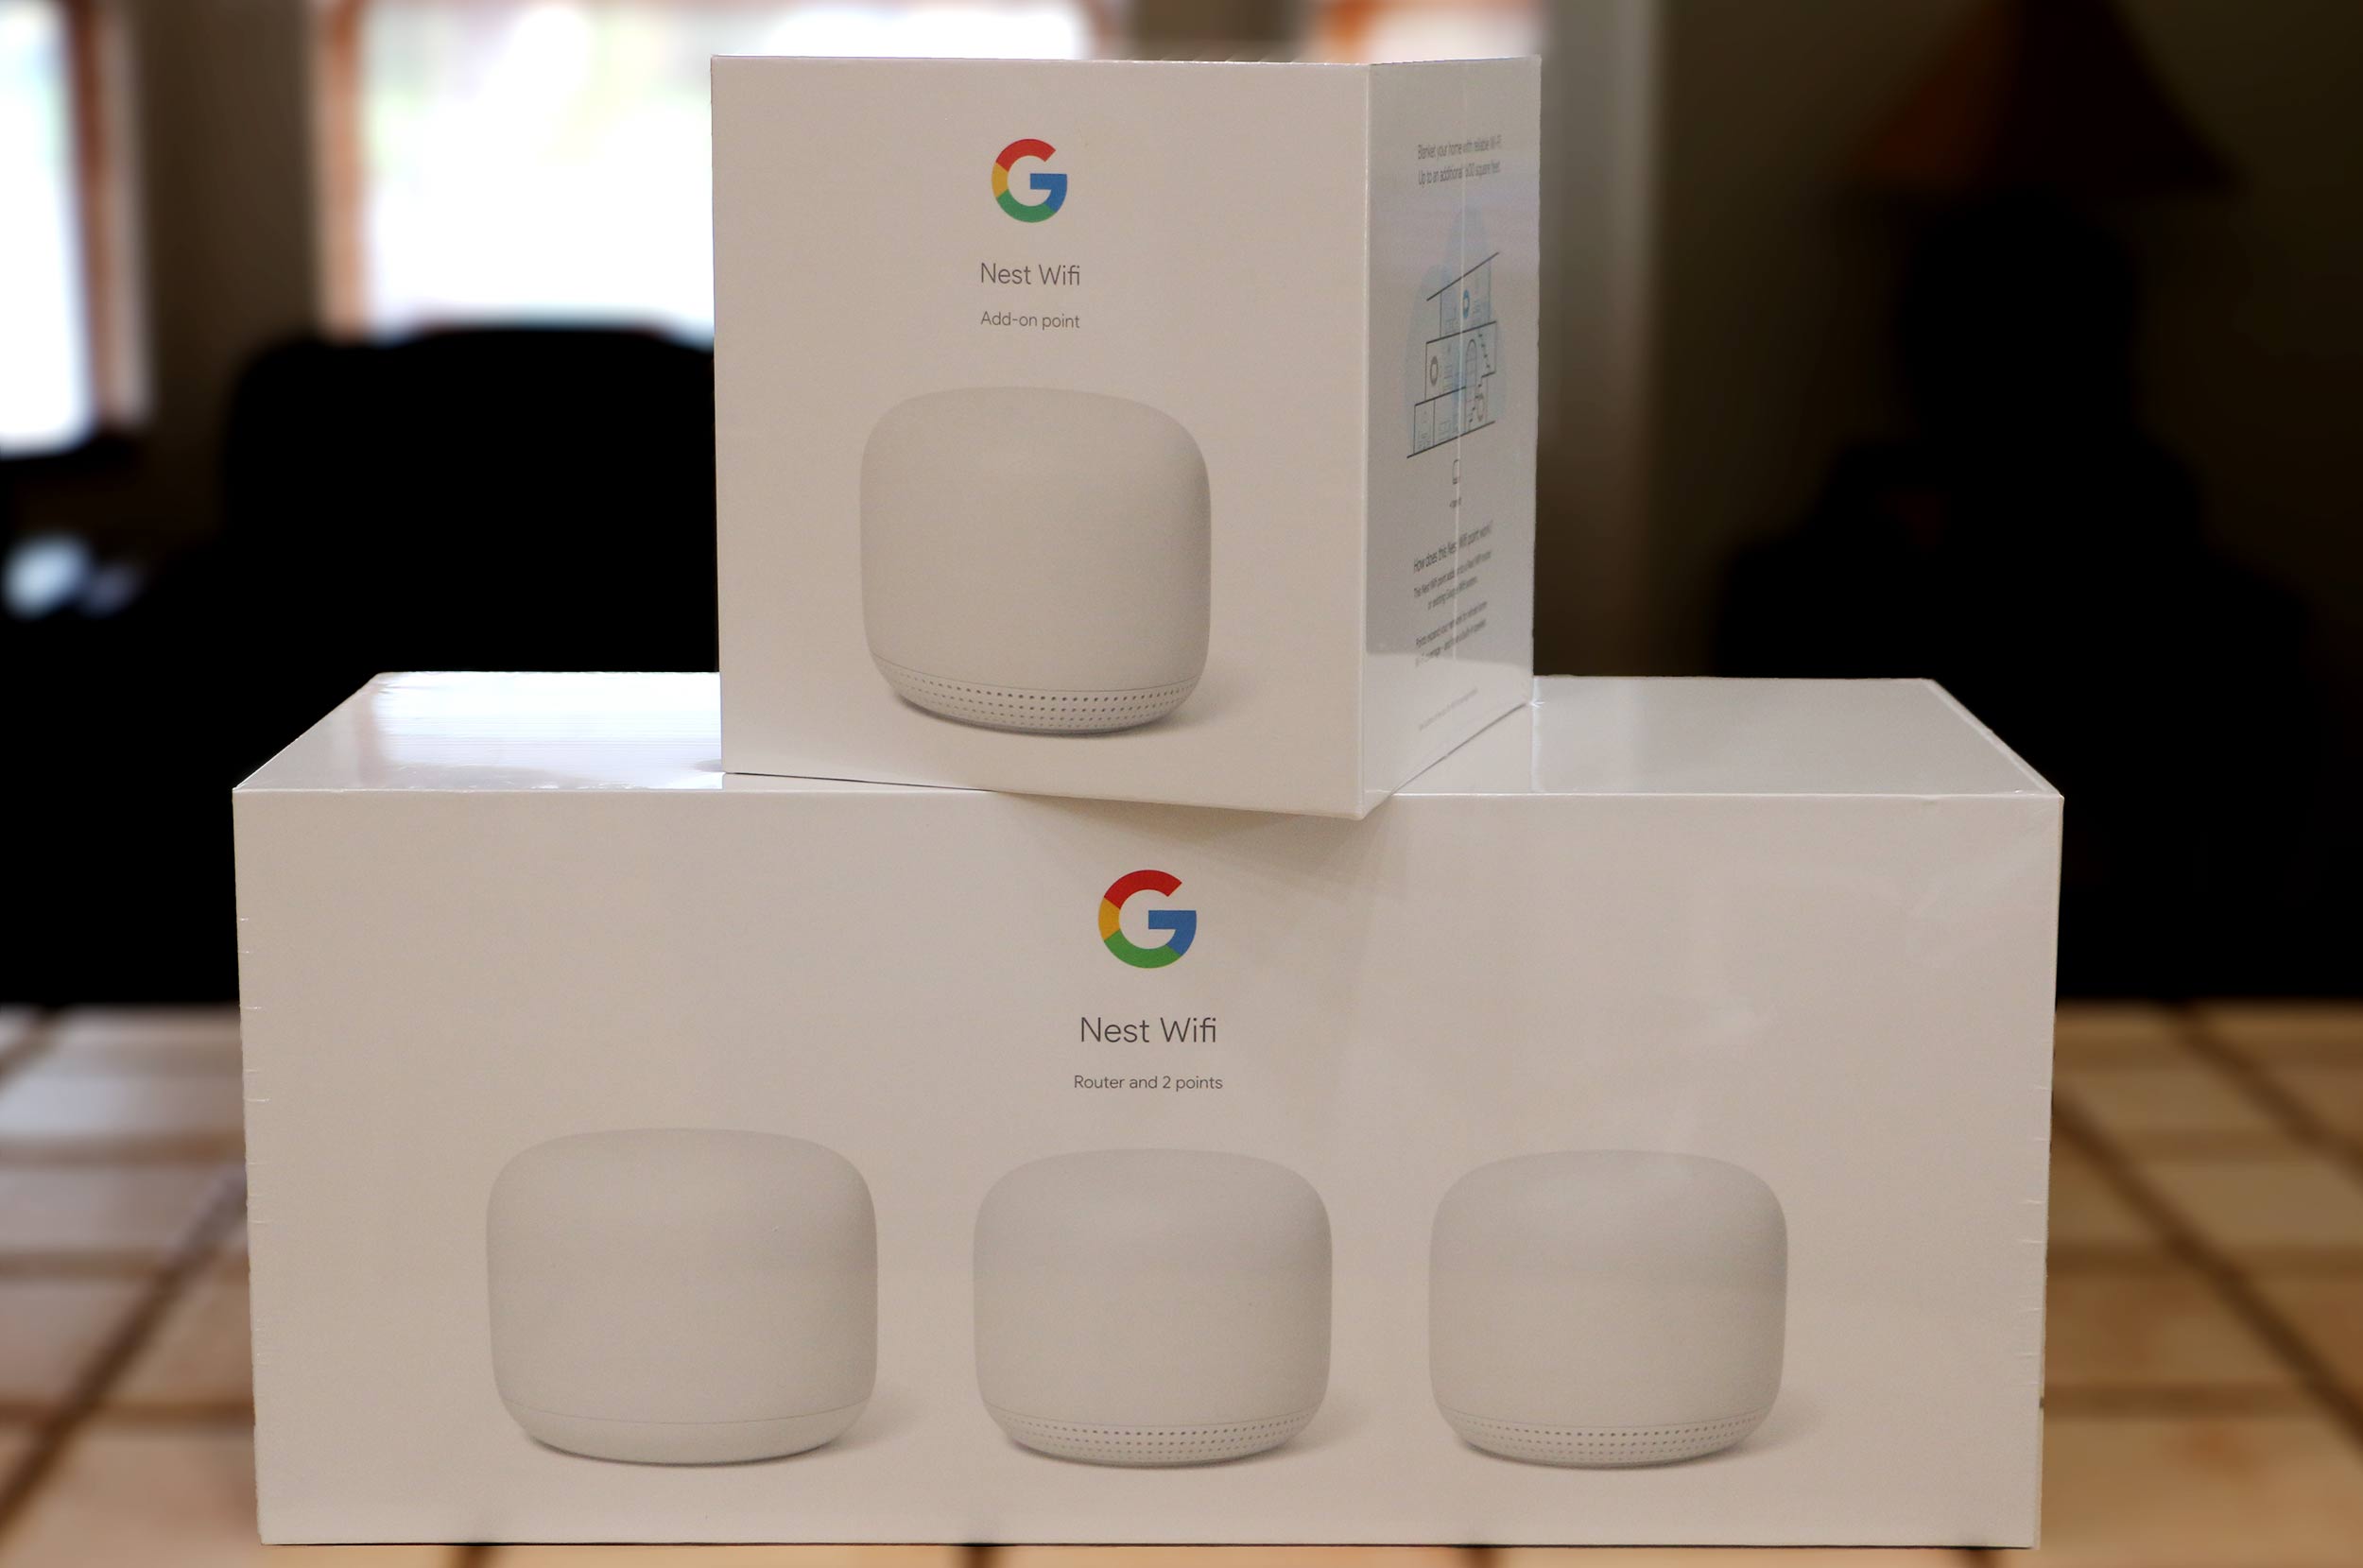 Google Nest WiFi Mesh Router Review: Say Goodbye to Dead Spots and Enjoy the Best WiFi Experience